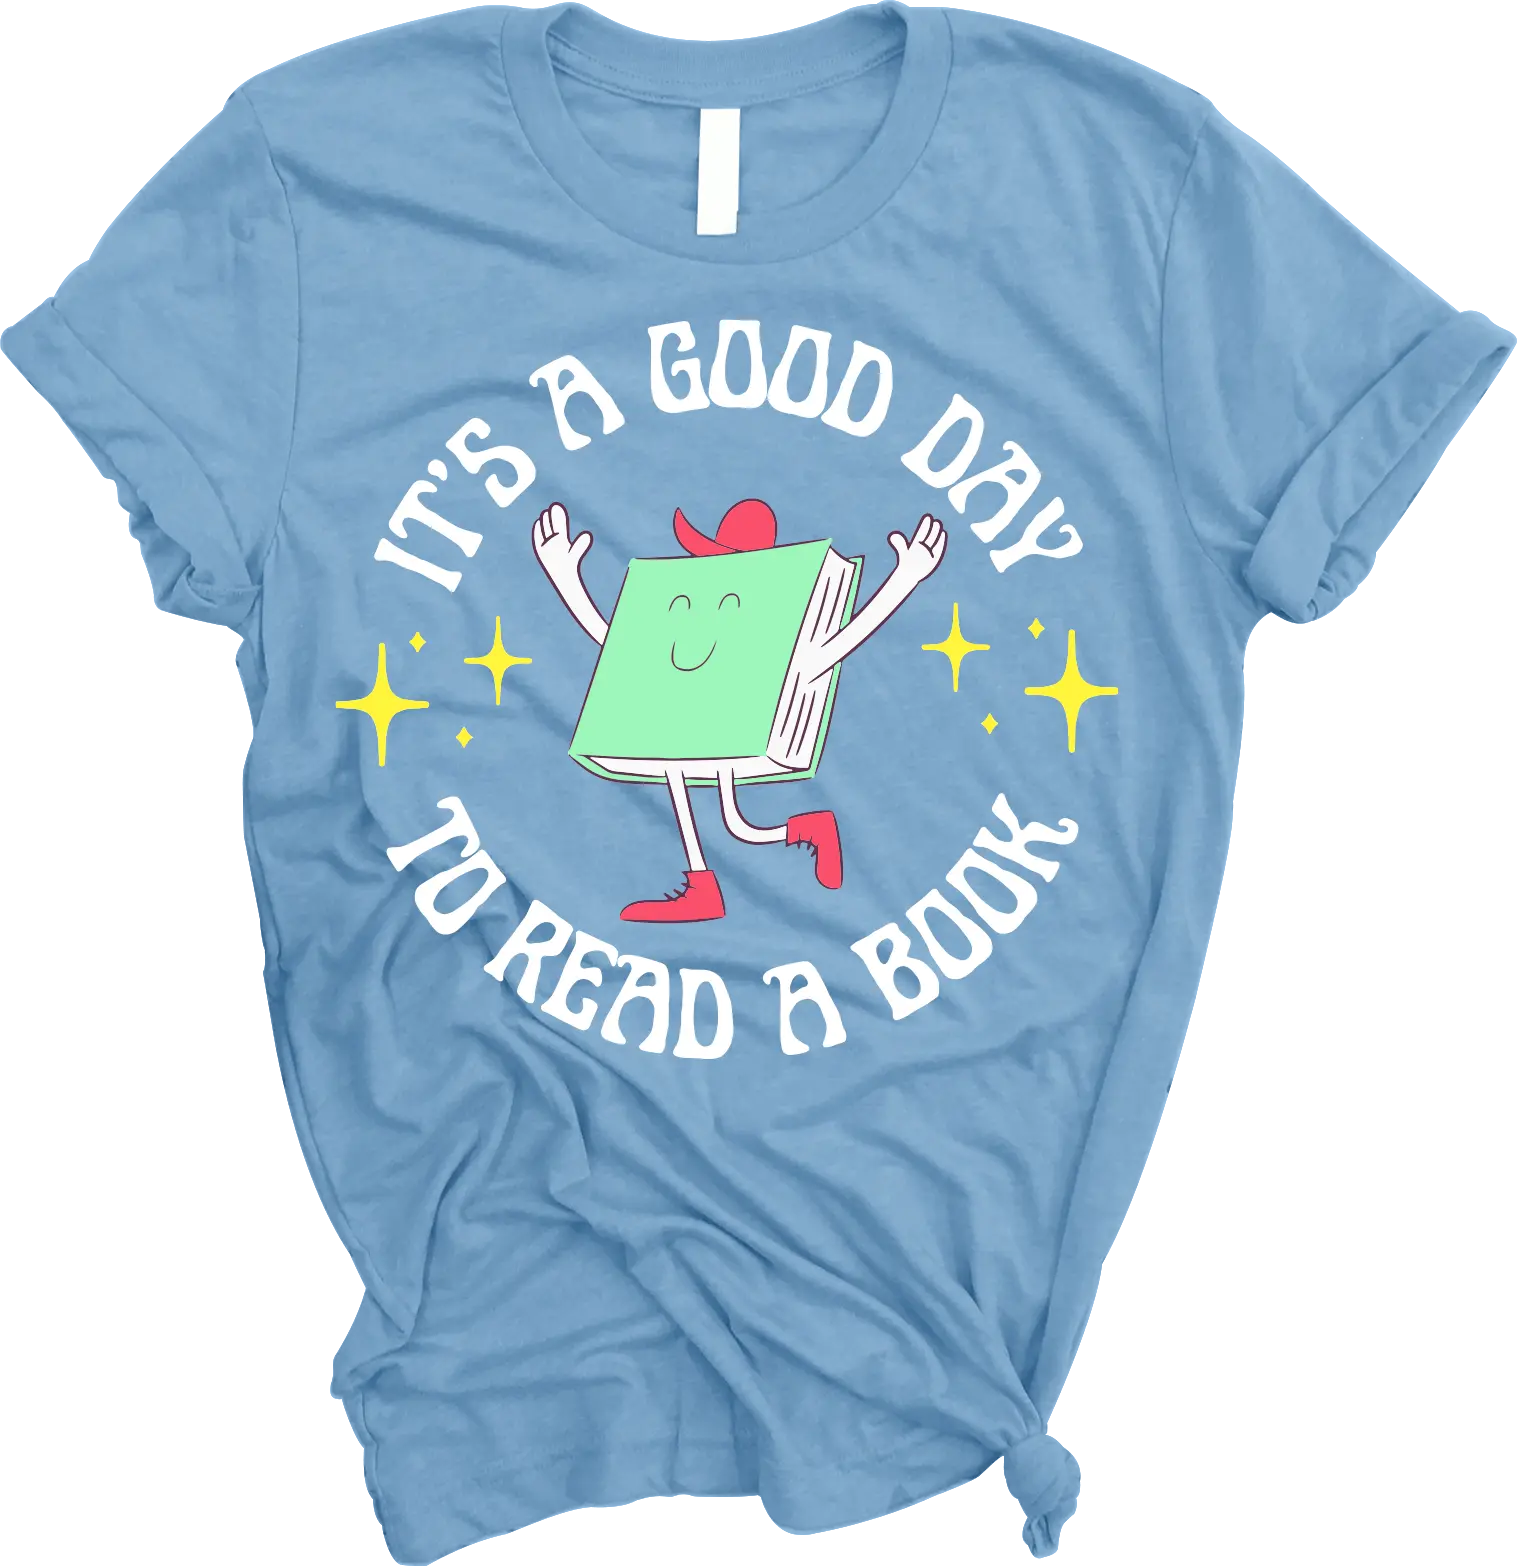 "It's a good day to read a book" Exclusive Tee